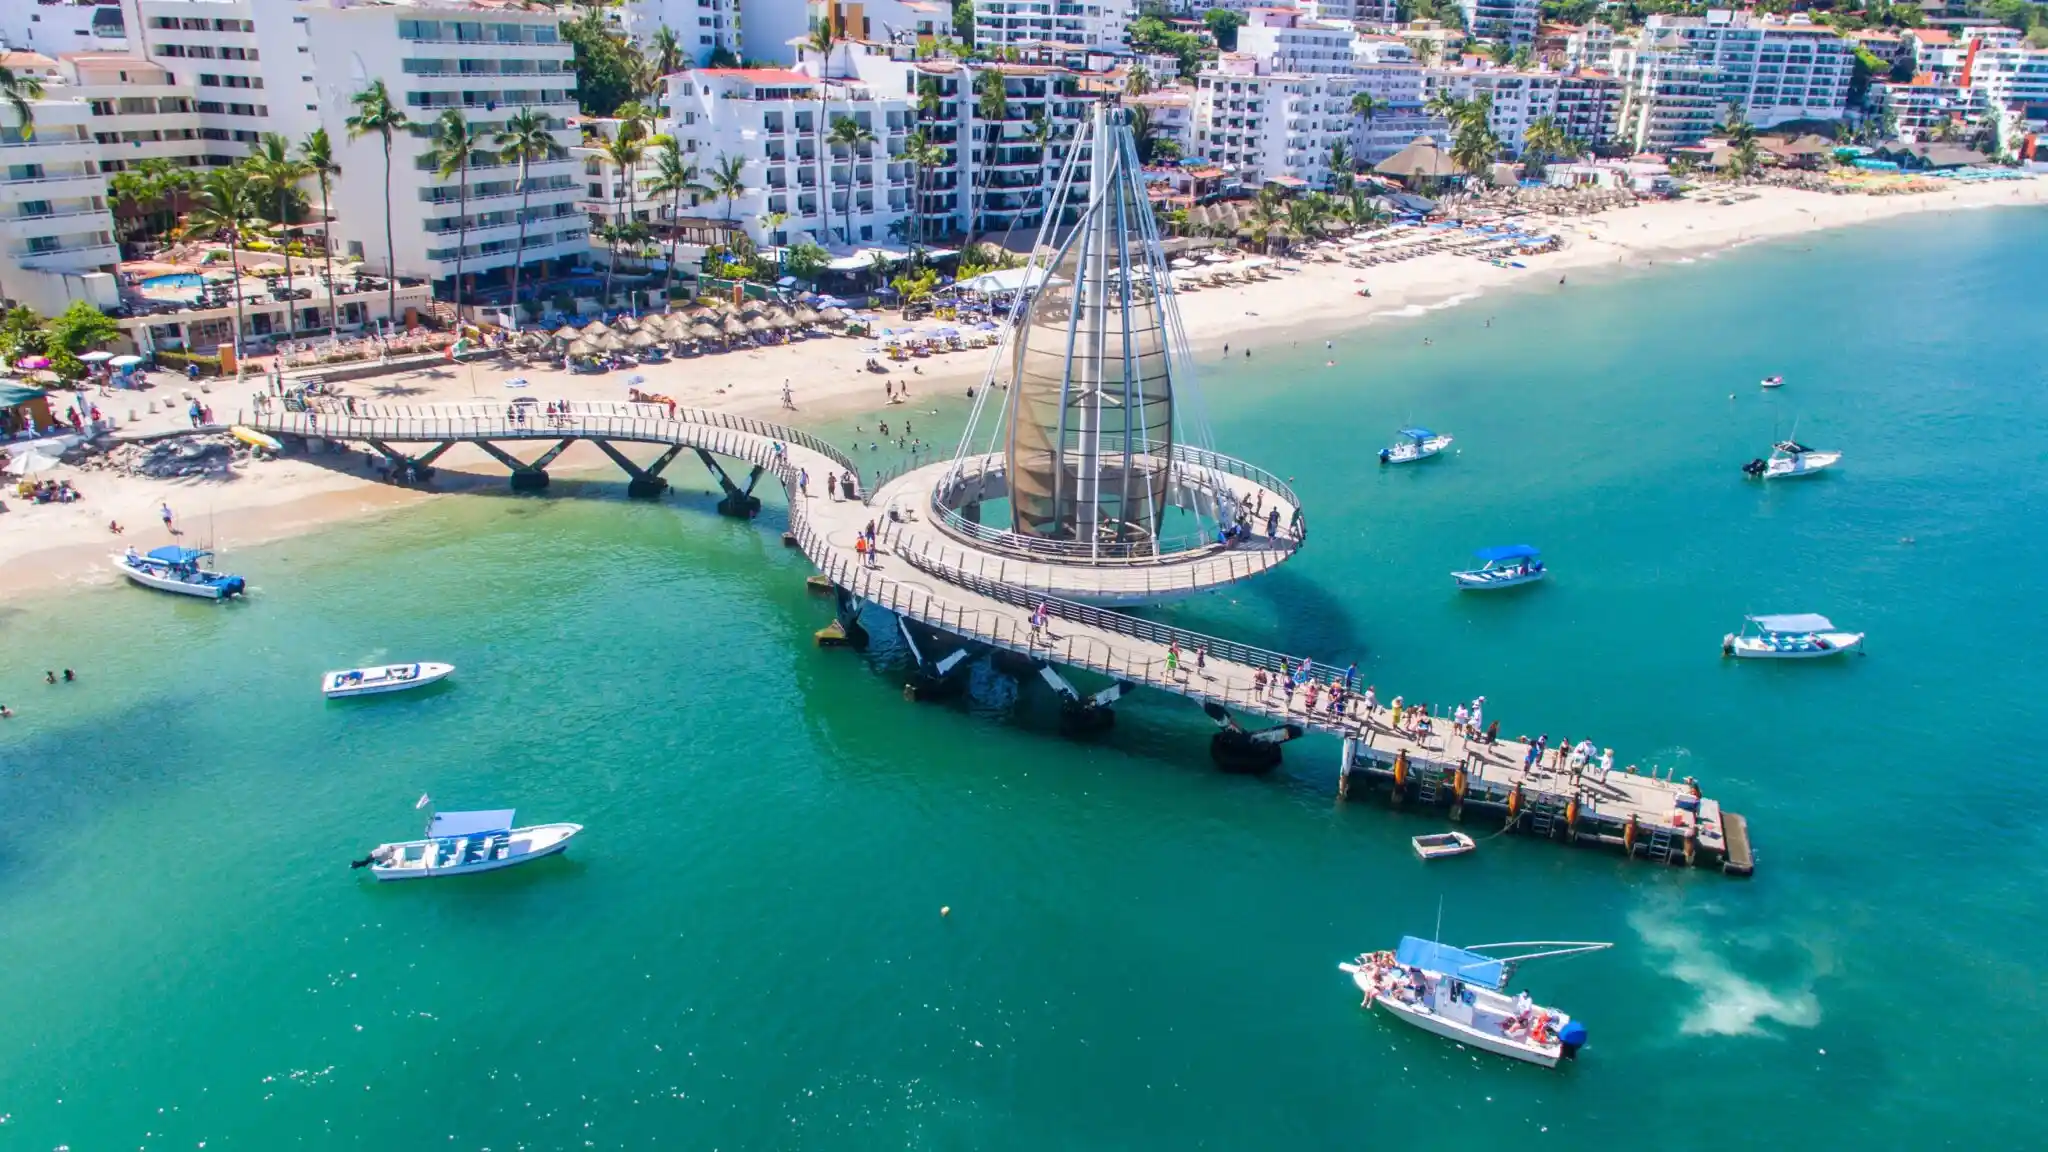 Playa Puerto Vallarta Playa Puerto Vallarta Mexico Cheapest Places To Travel When You're Young And Broke